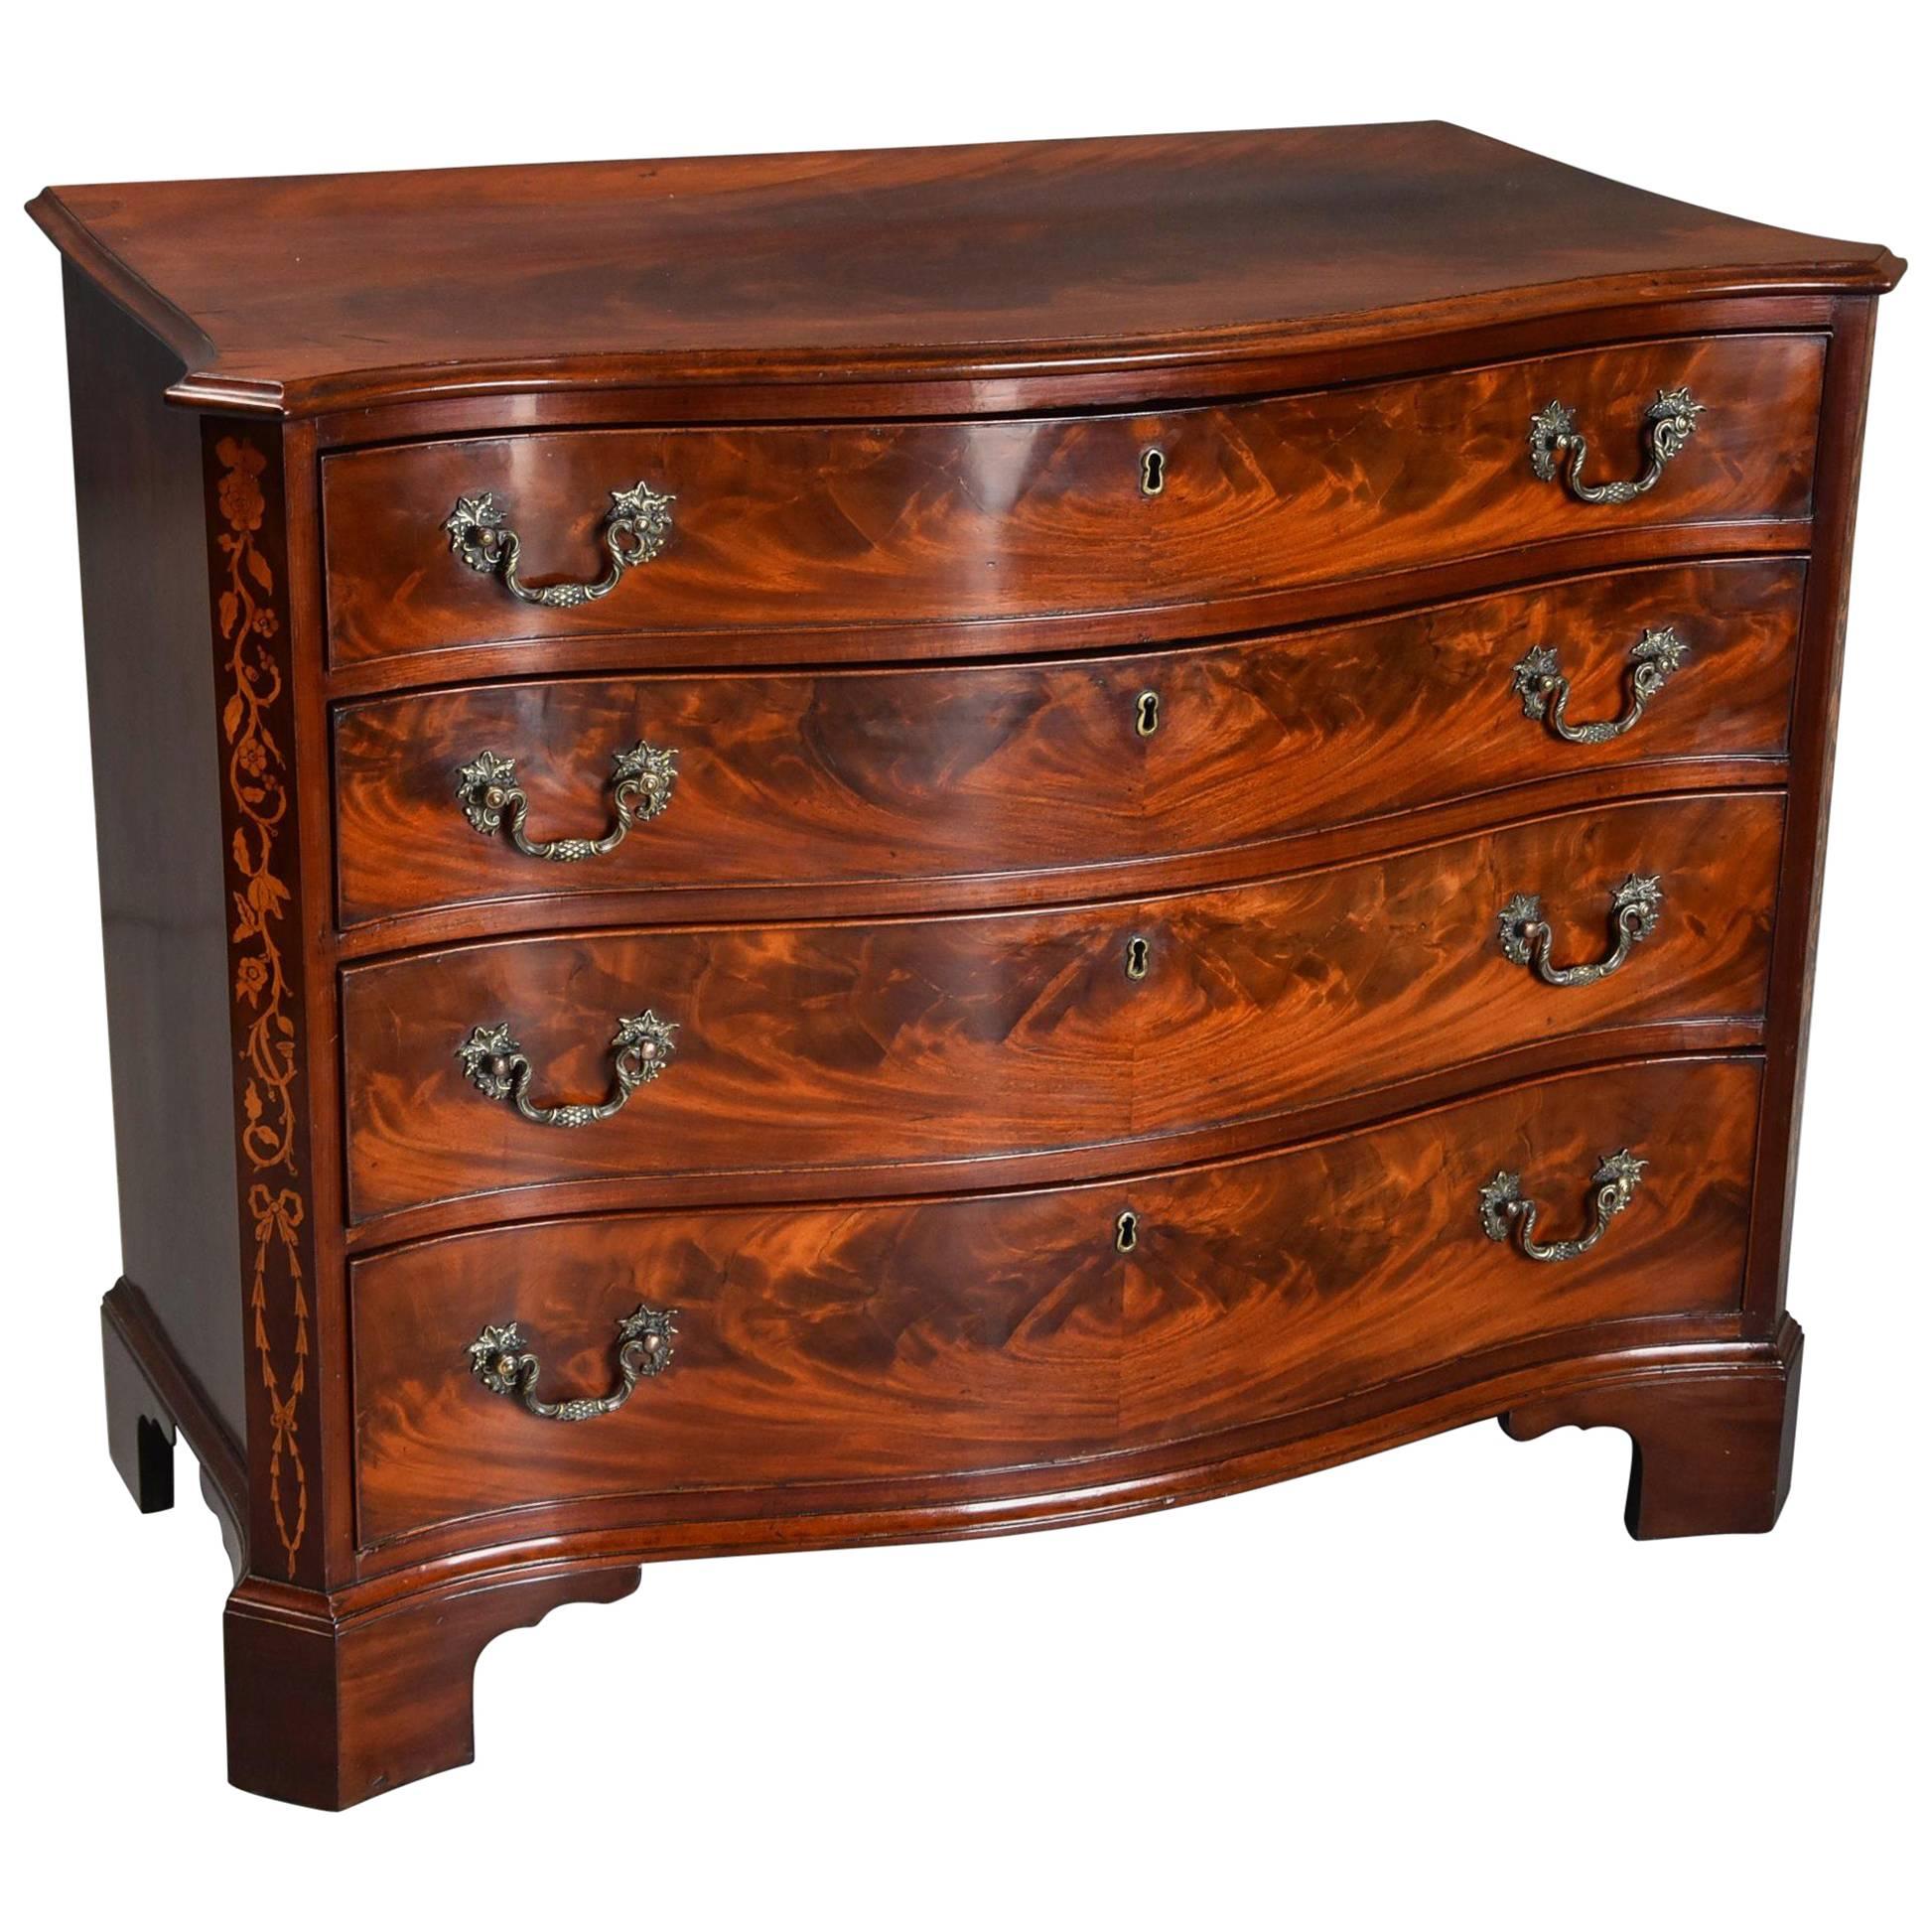 Superb Quality 19th Century Mahogany Serpentine Chest of Drawers